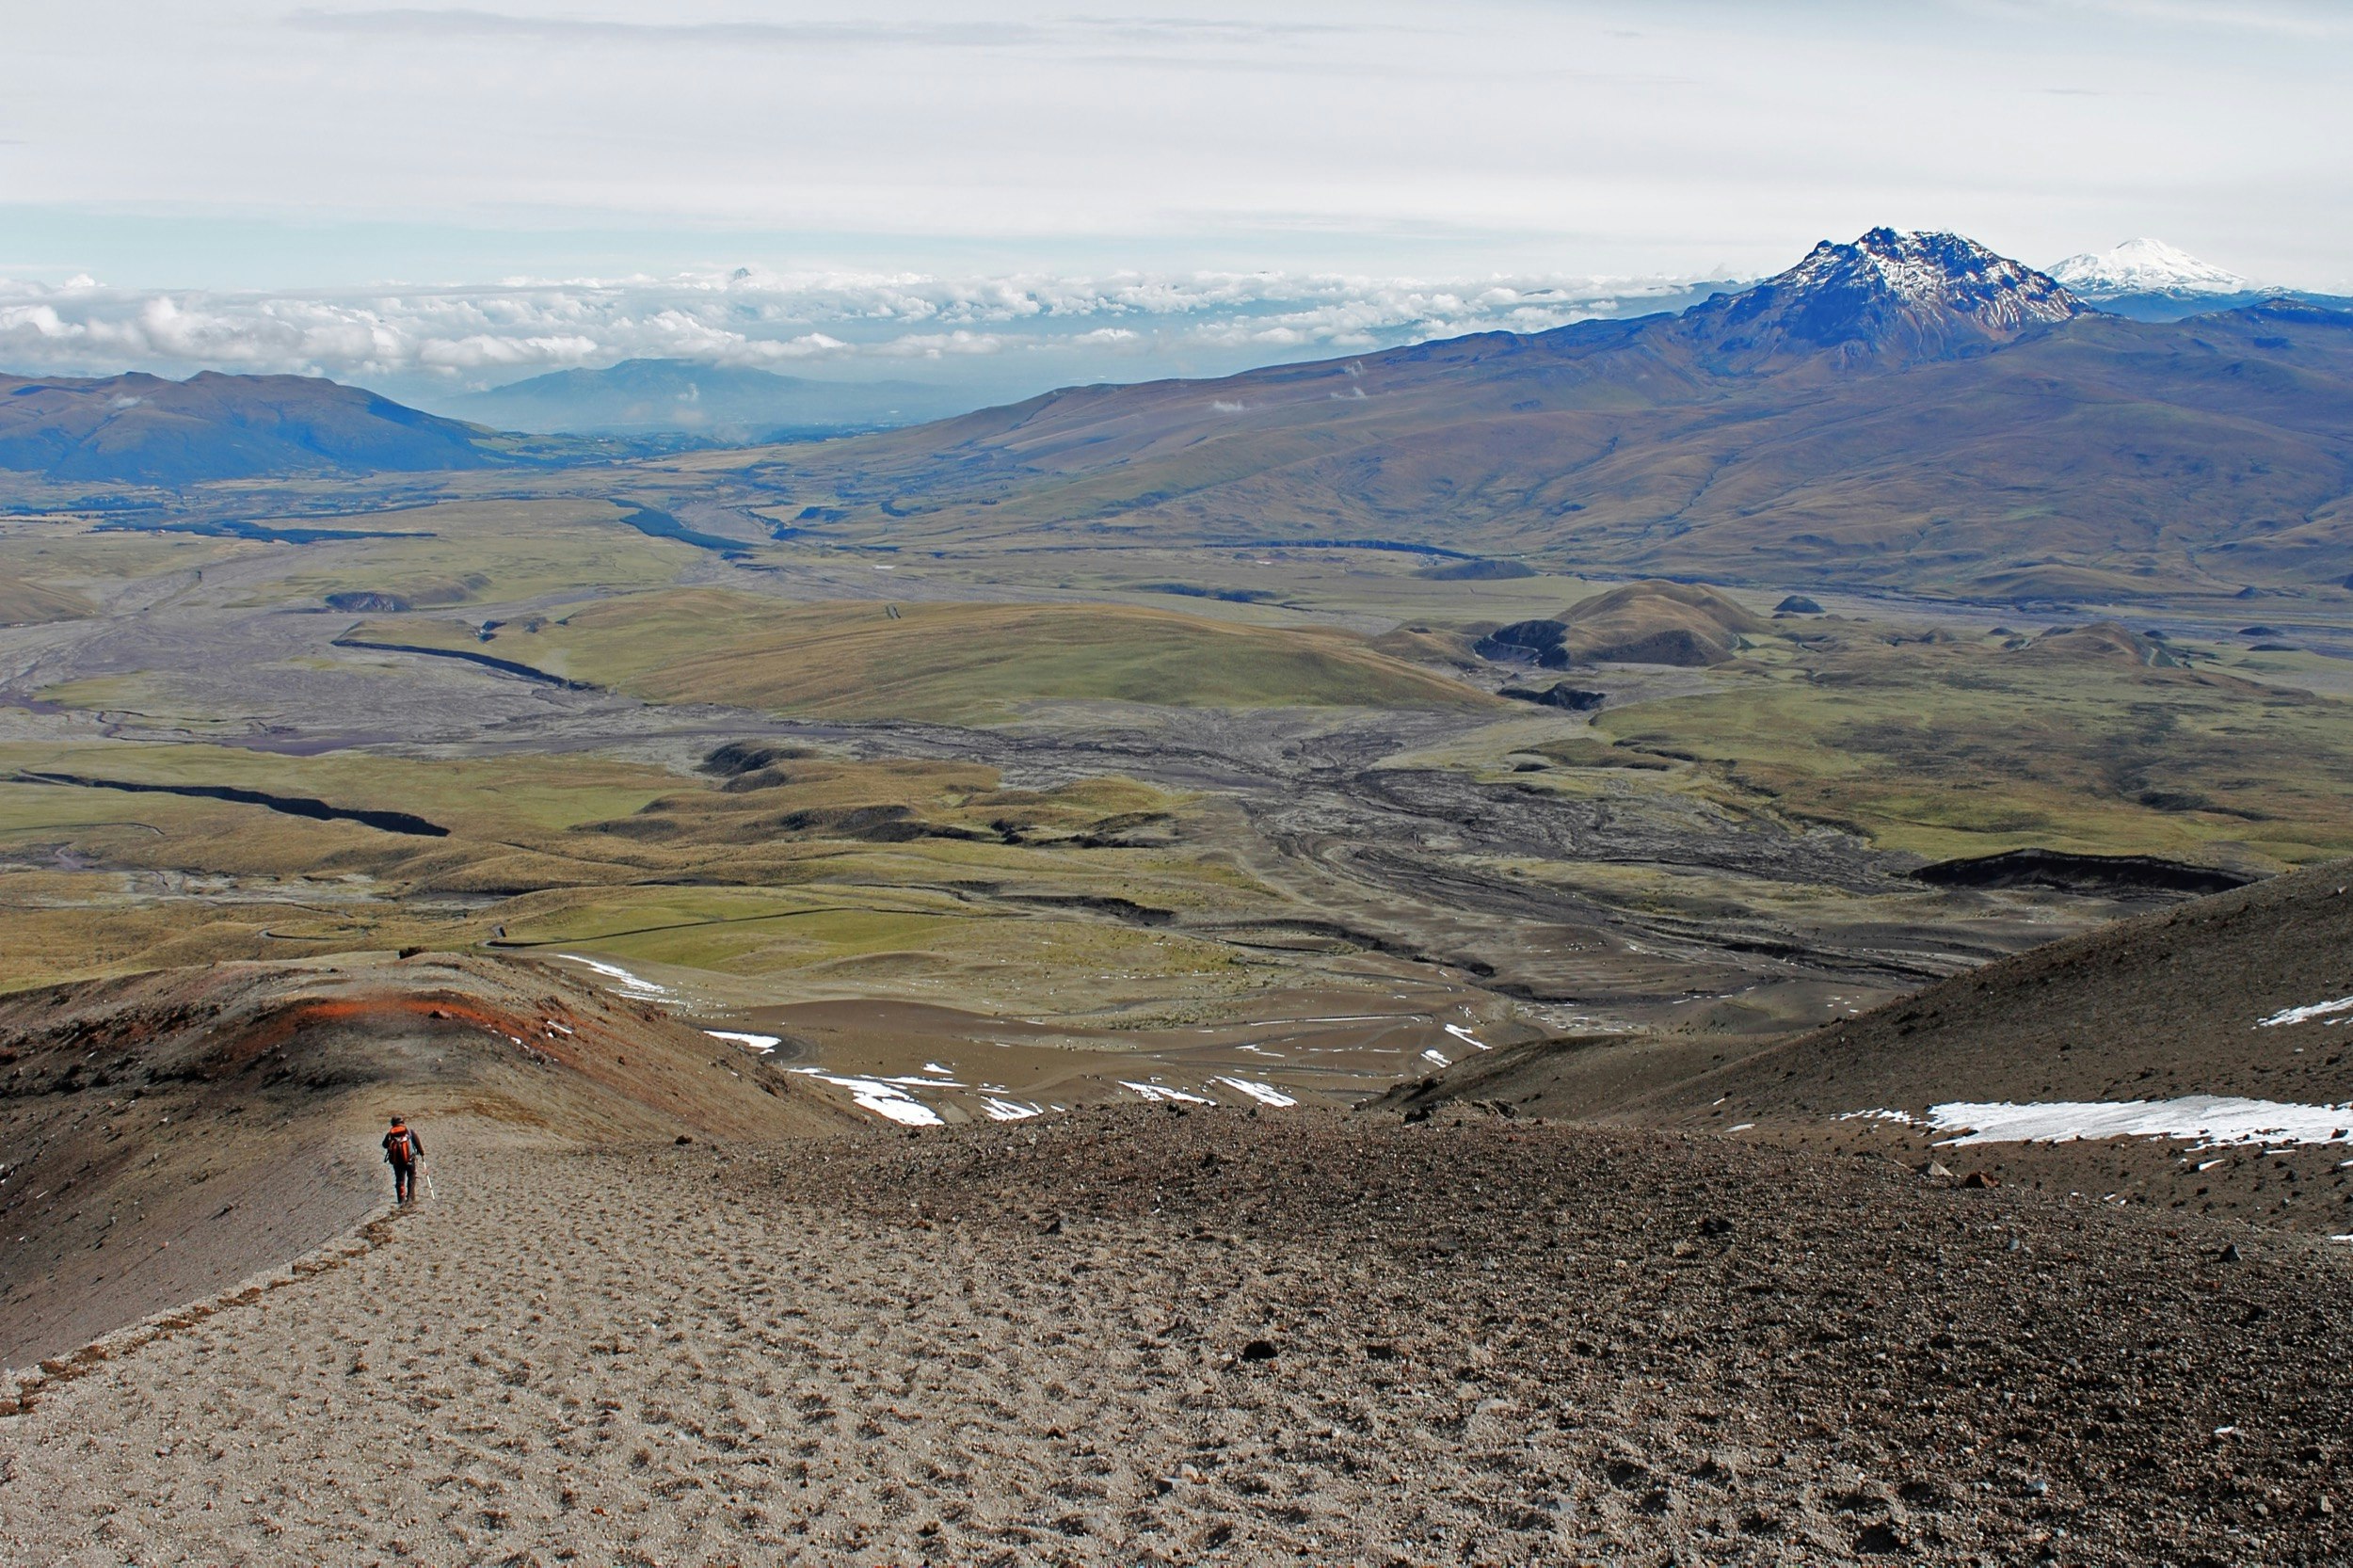 A solitary backpacker walks through scrubland on his or her way to an isolated mountain in Ecuador; Climbing a fourteener